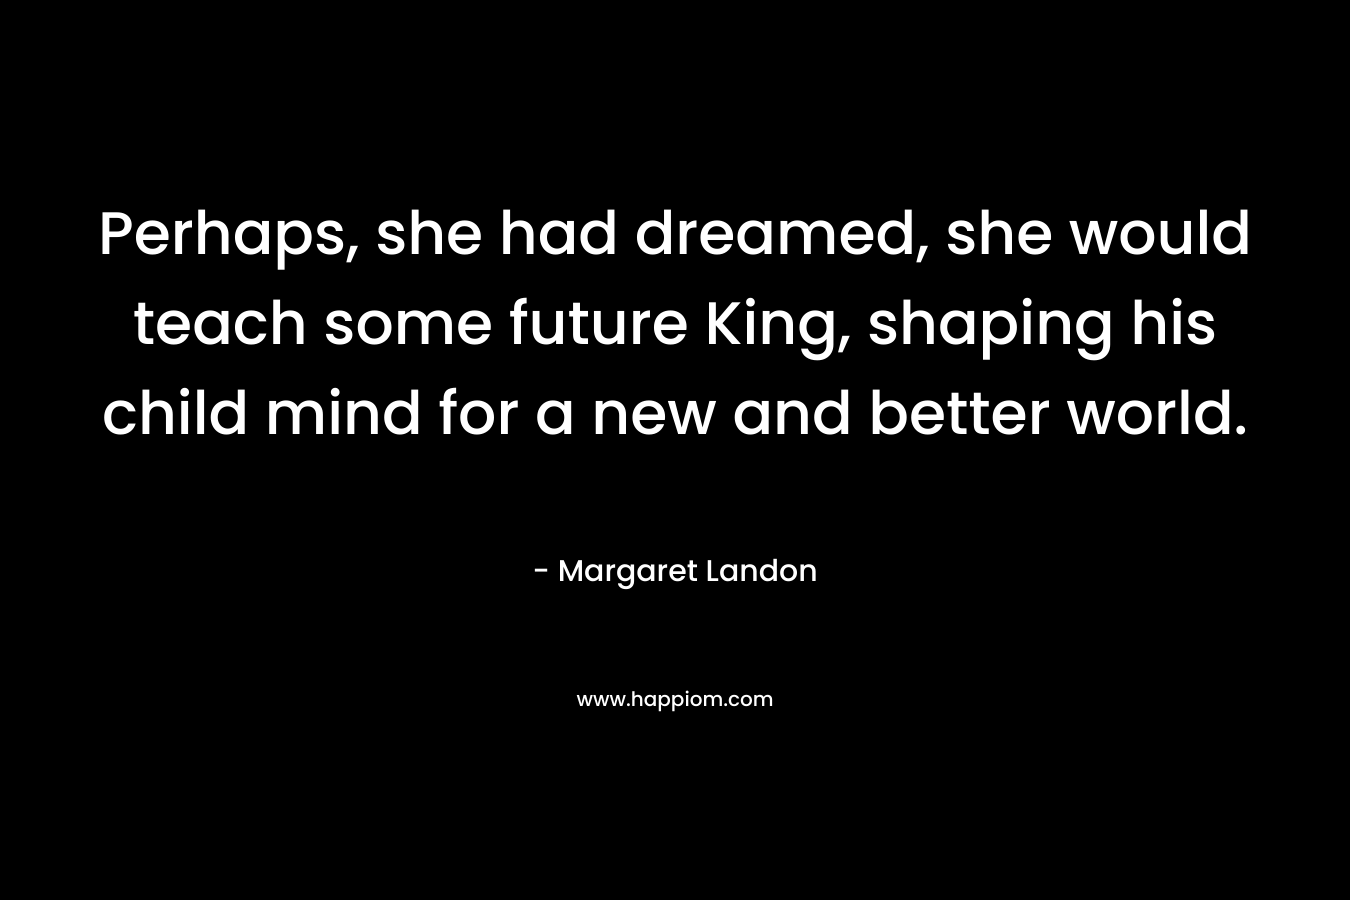 Perhaps, she had dreamed, she would teach some future King, shaping his child mind for a new and better world. – Margaret Landon